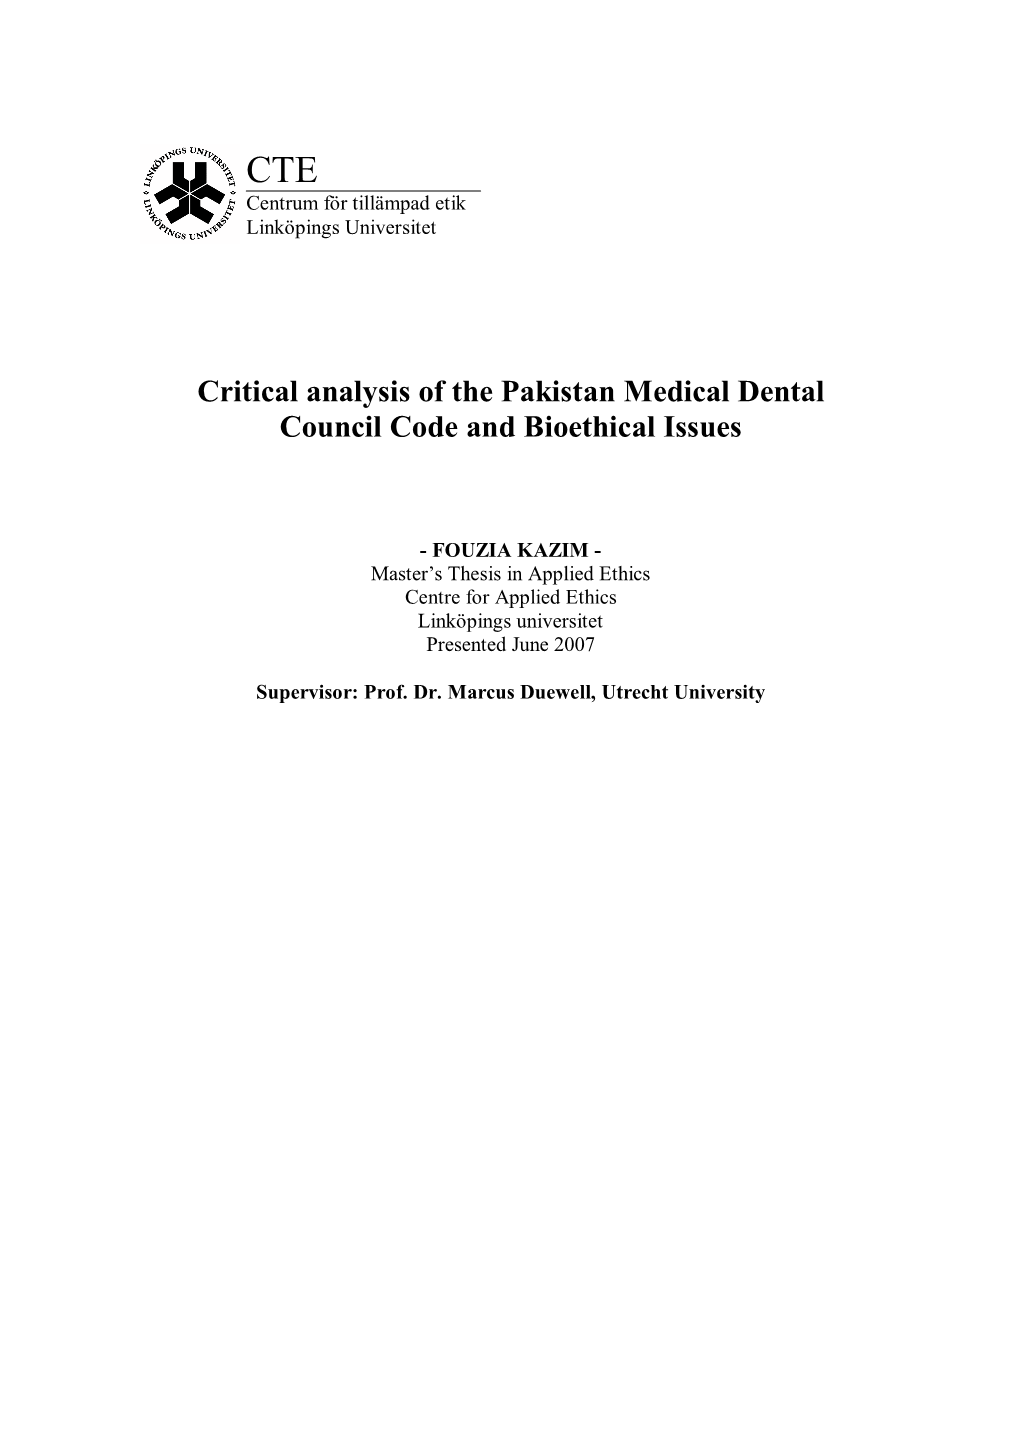 Critical Analysis of the Pakistan Medical Dental Council Code and Bioethical Issues